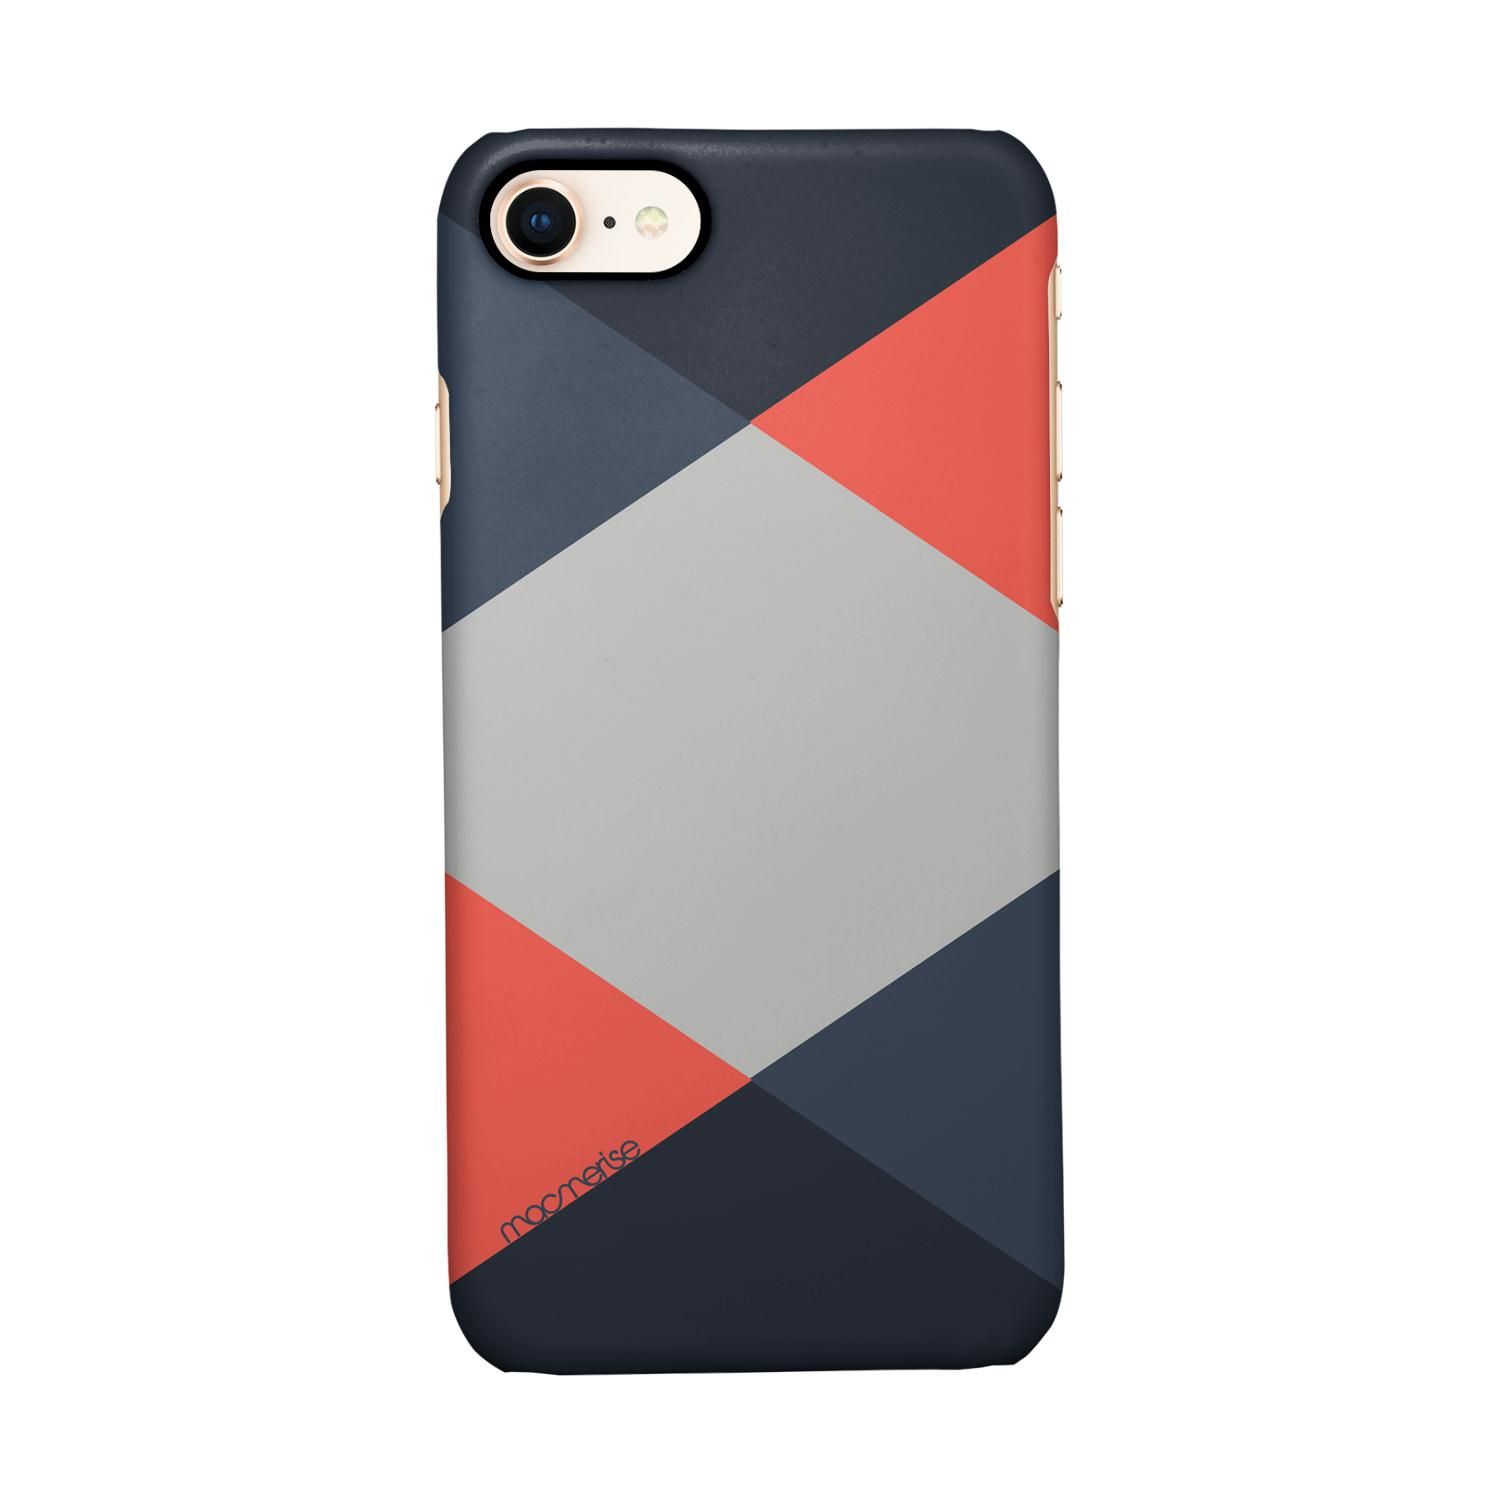 Buy Criss Cross Coral - Sleek Phone Case for iPhone 7 Online